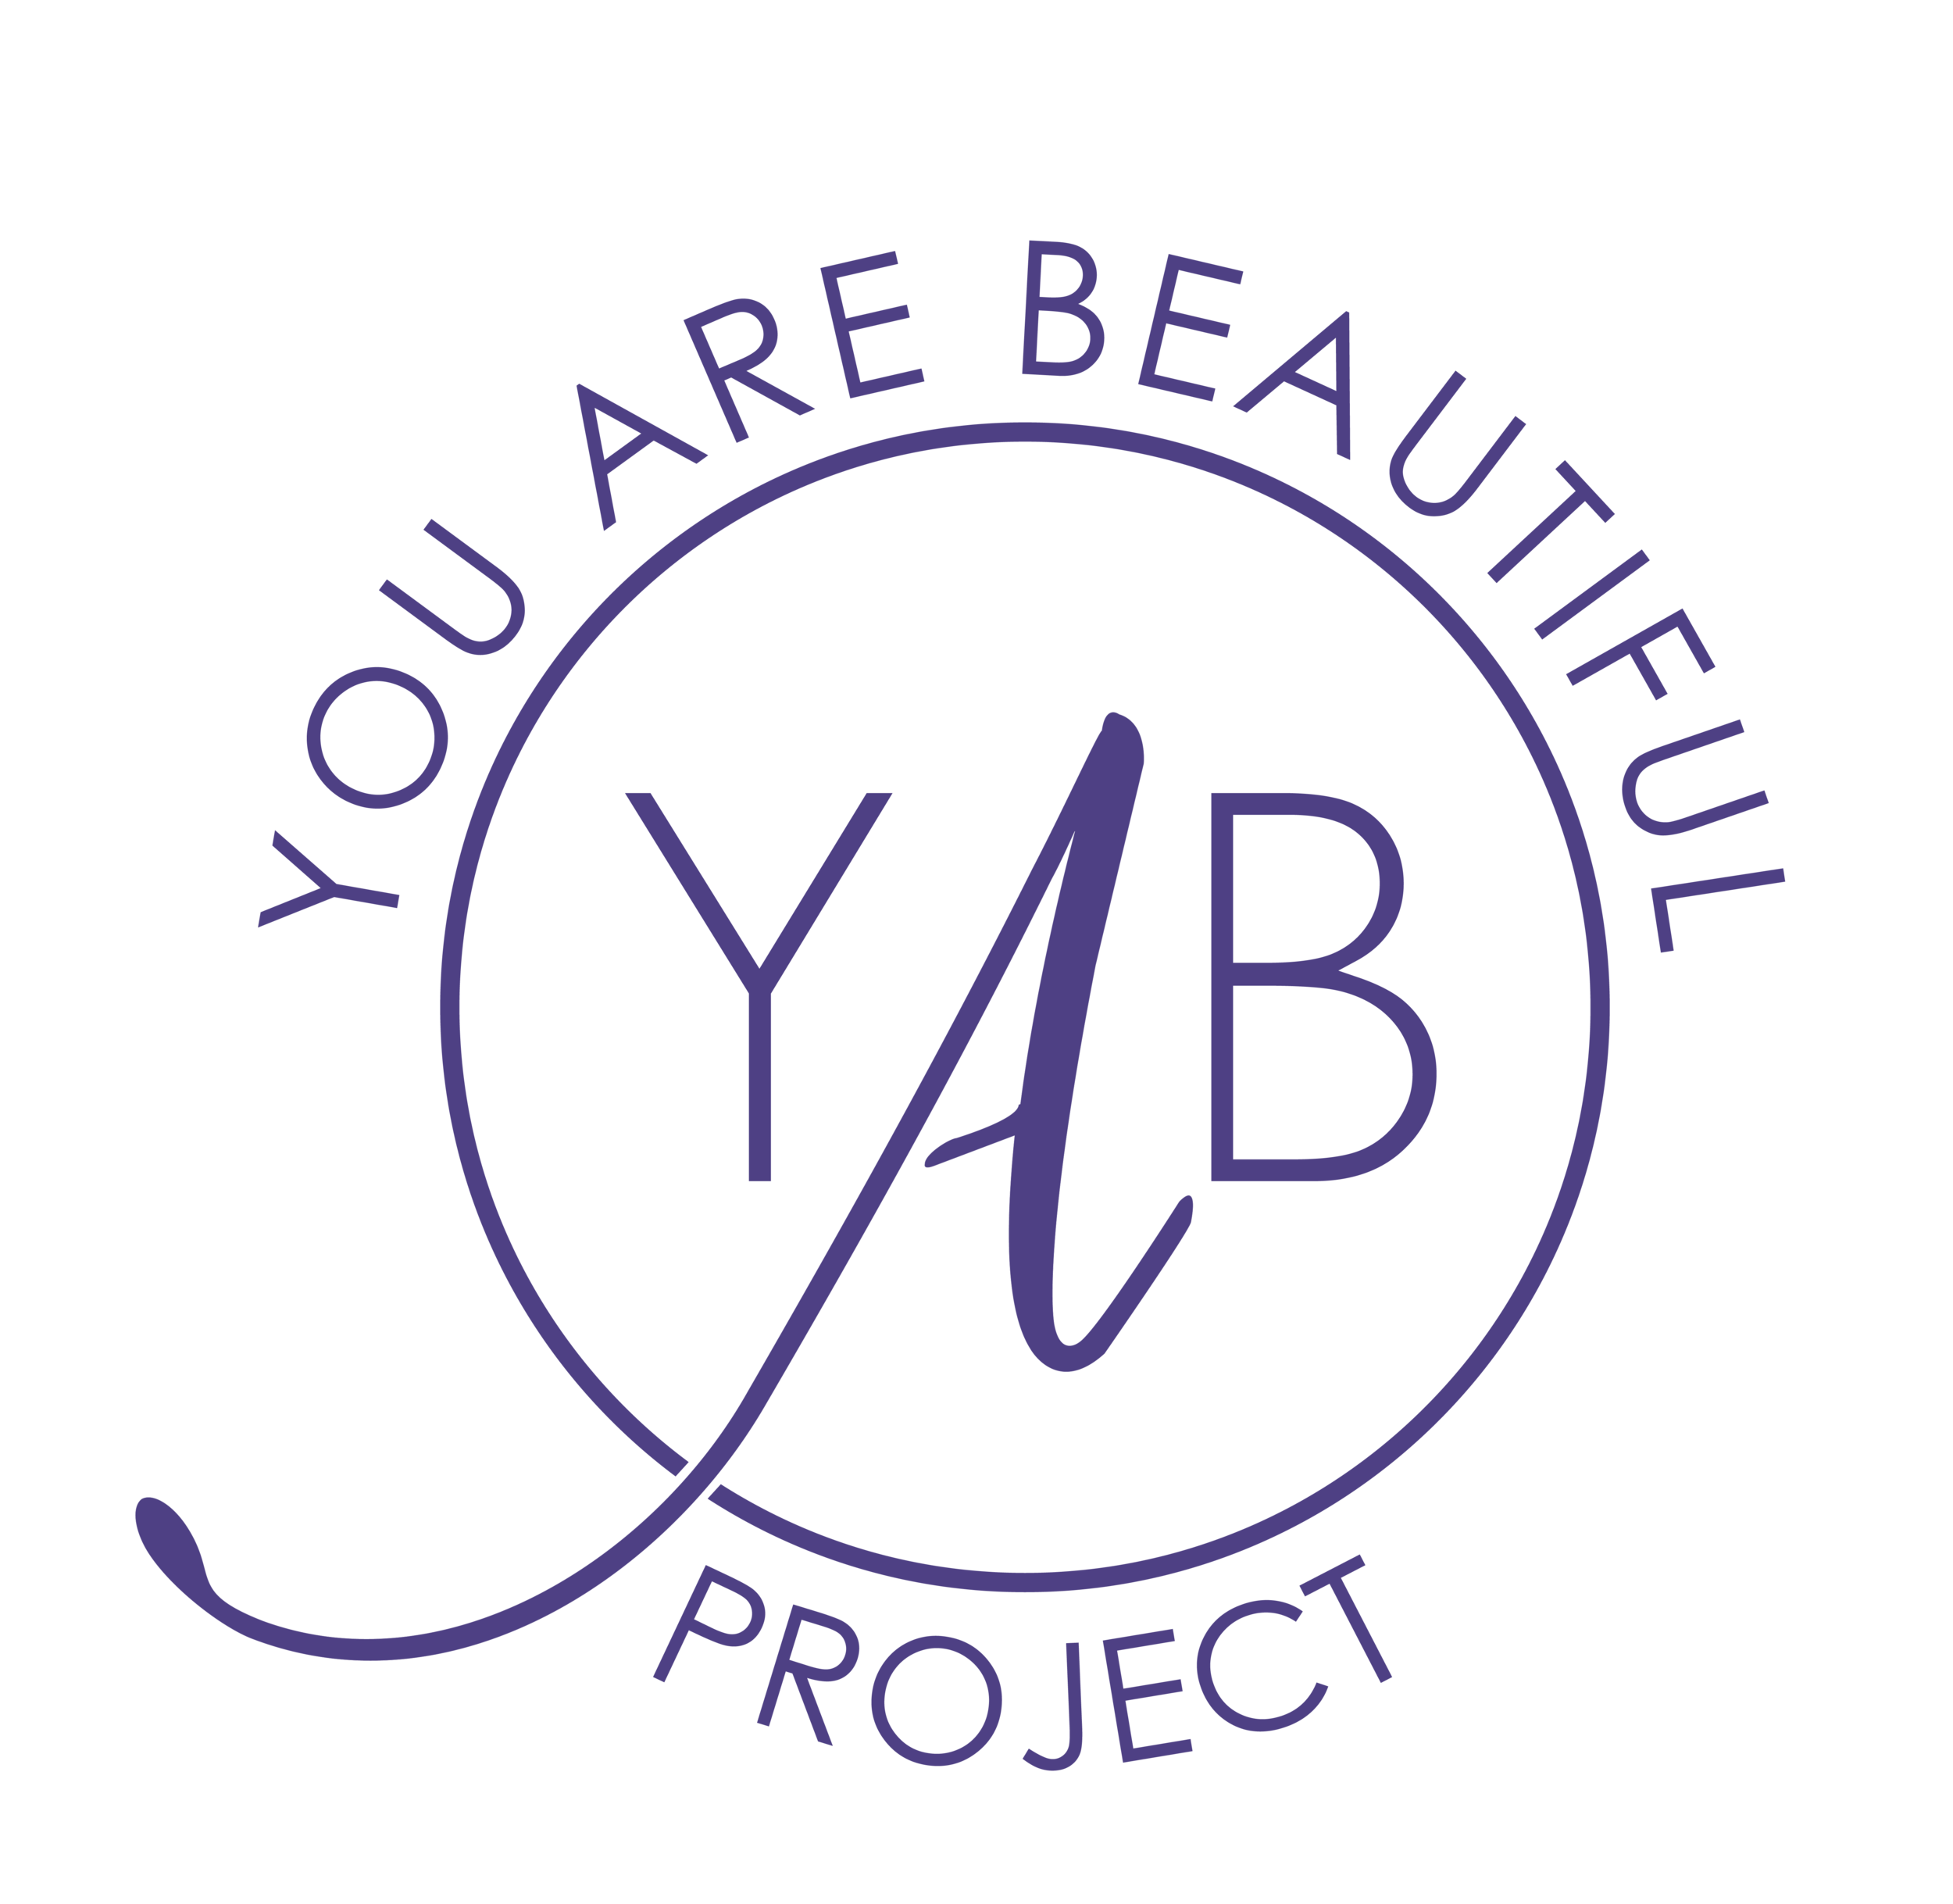 You Are beautiful Project